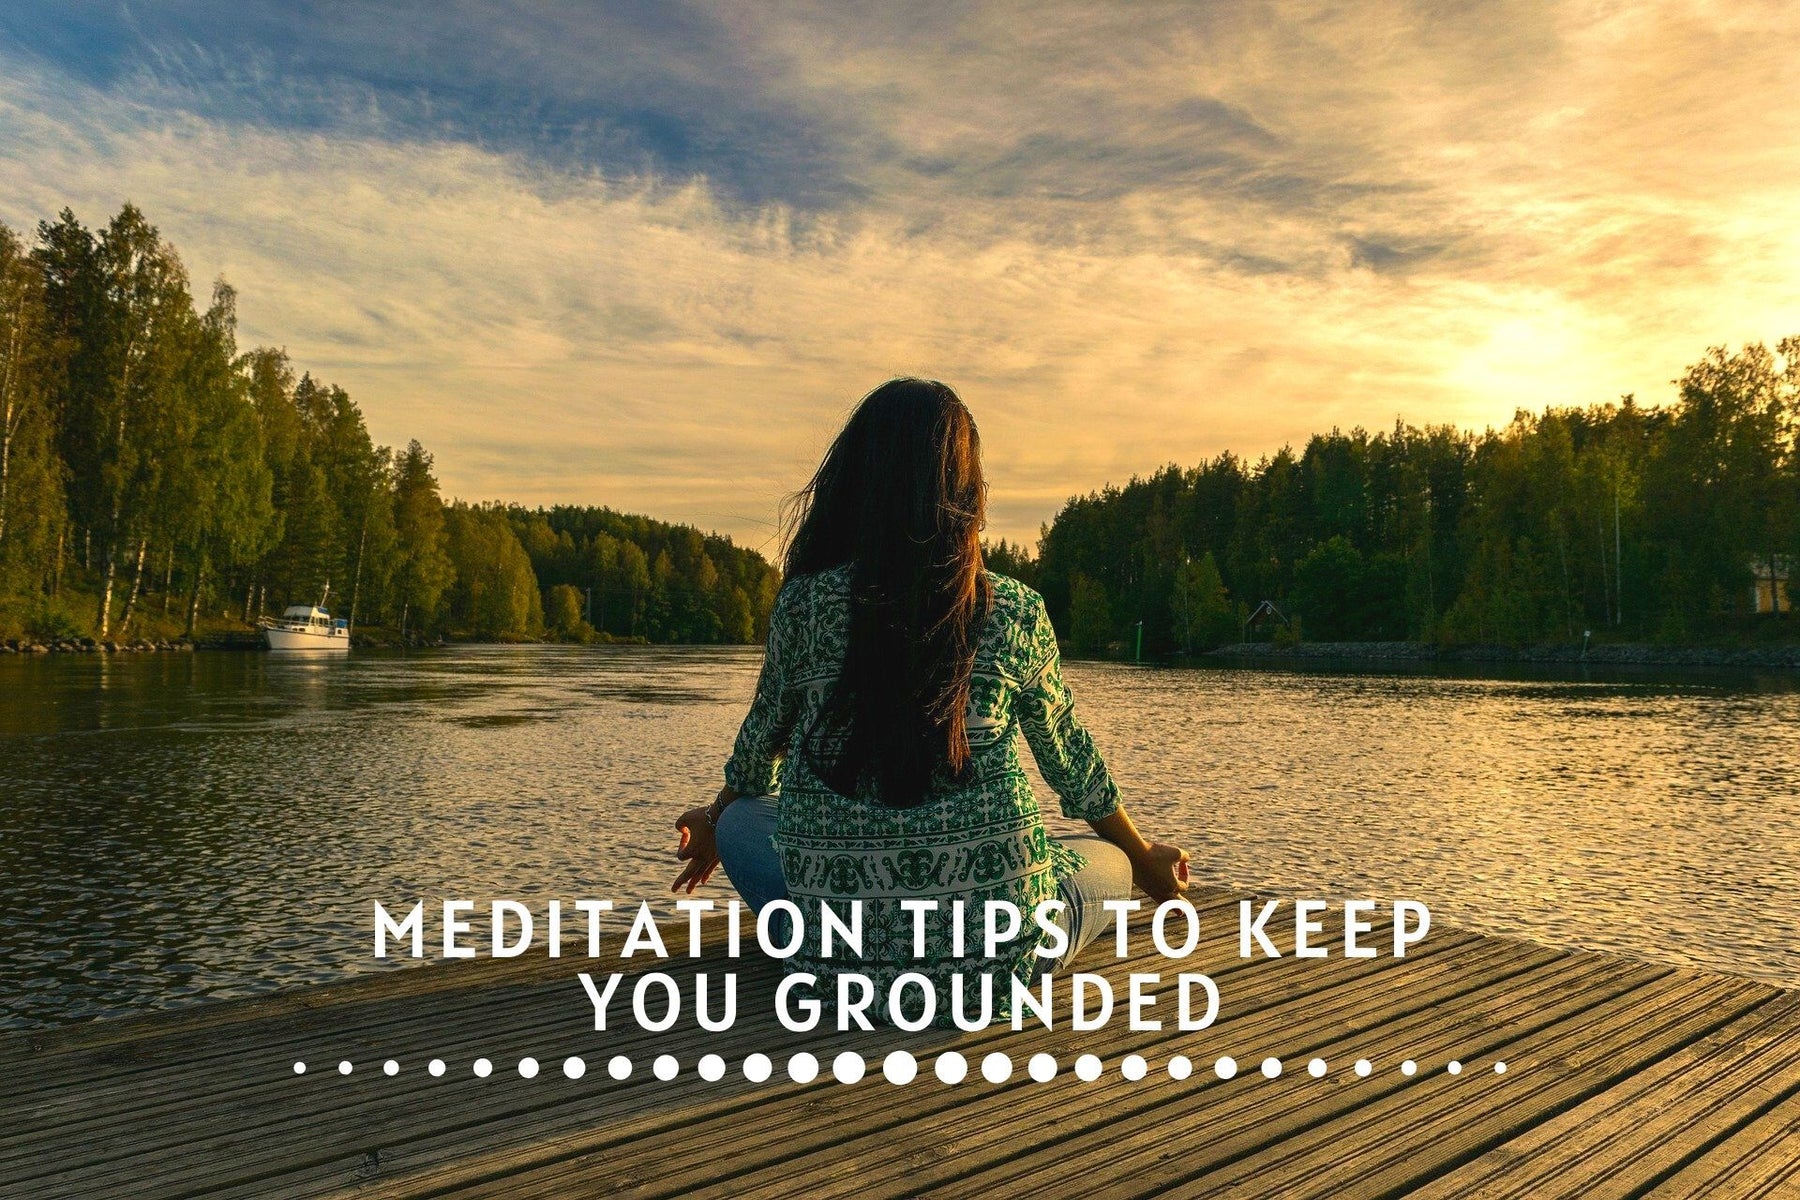 Person - Meditation Tips to Keep You Grounded 